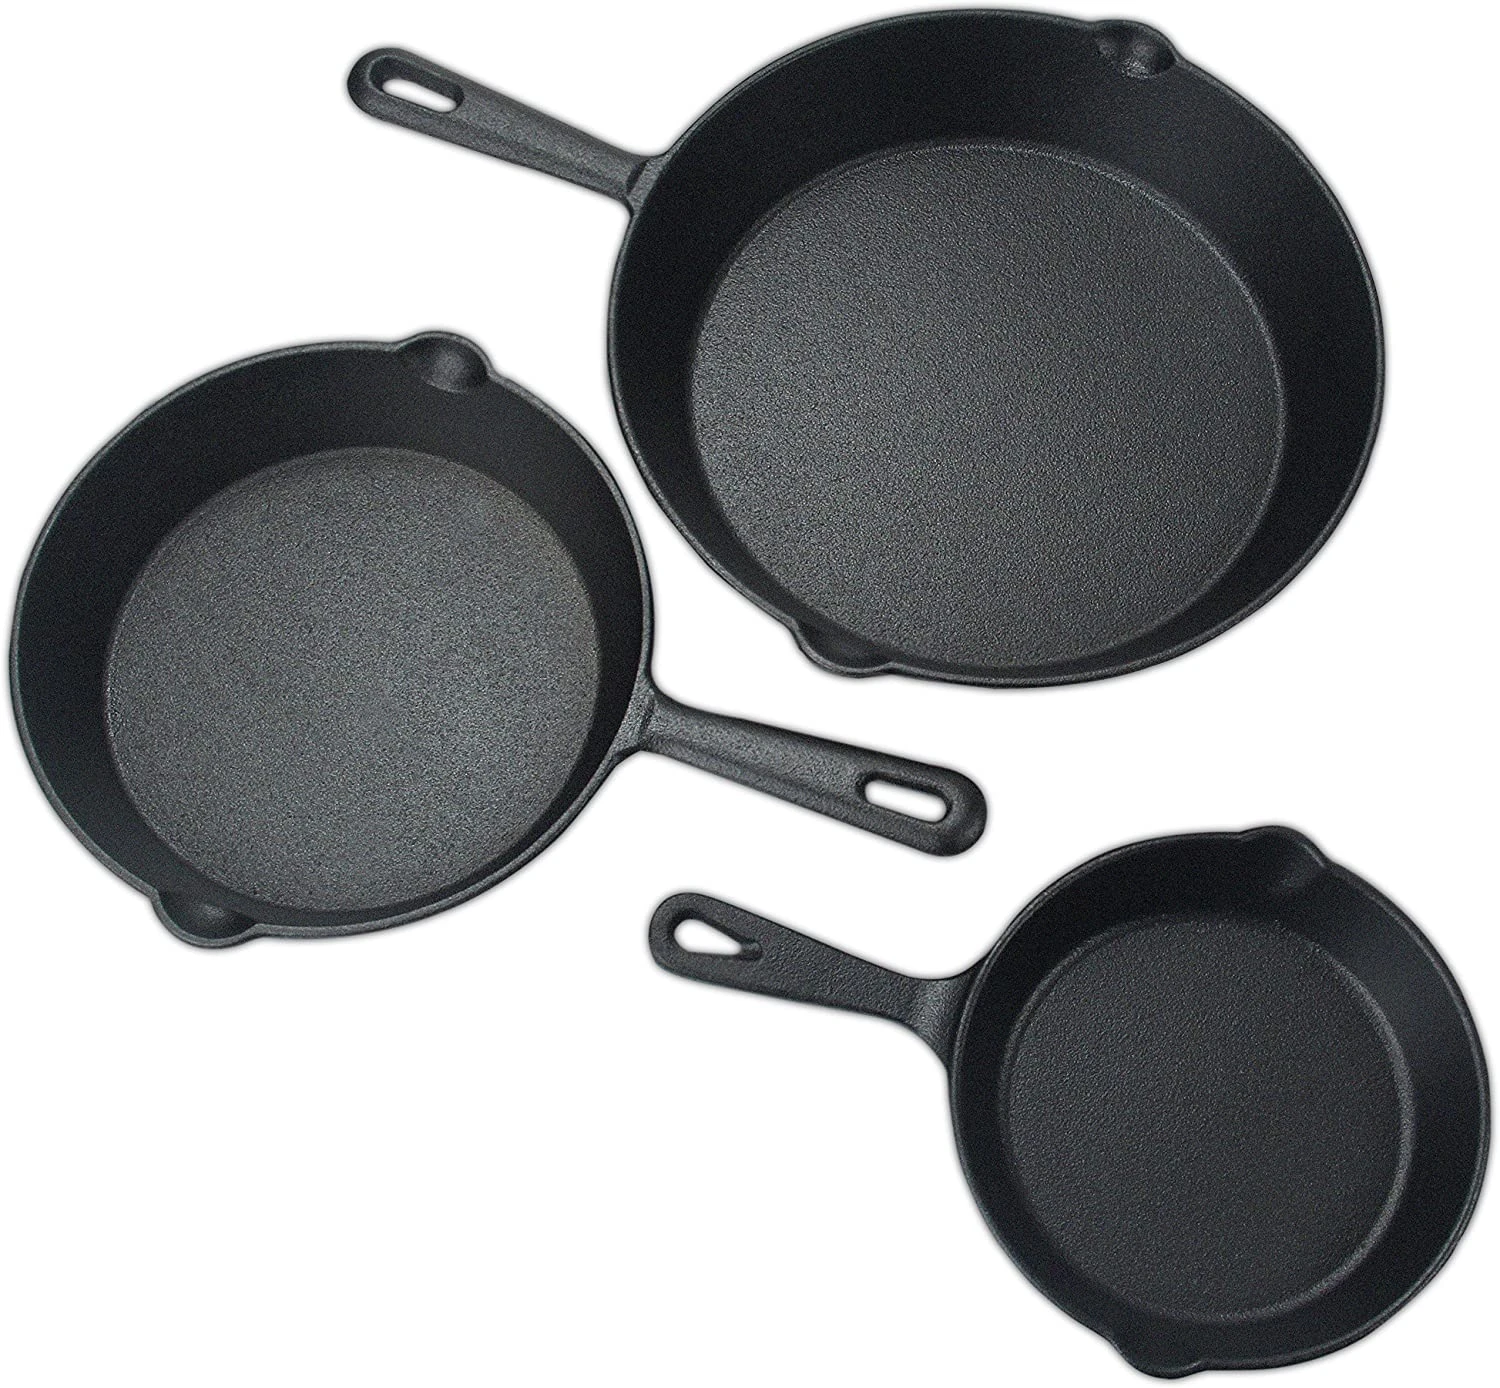 Wholesale High Quality Customizable Easy to Use Portable Cast Iron Skillet 10 Inch